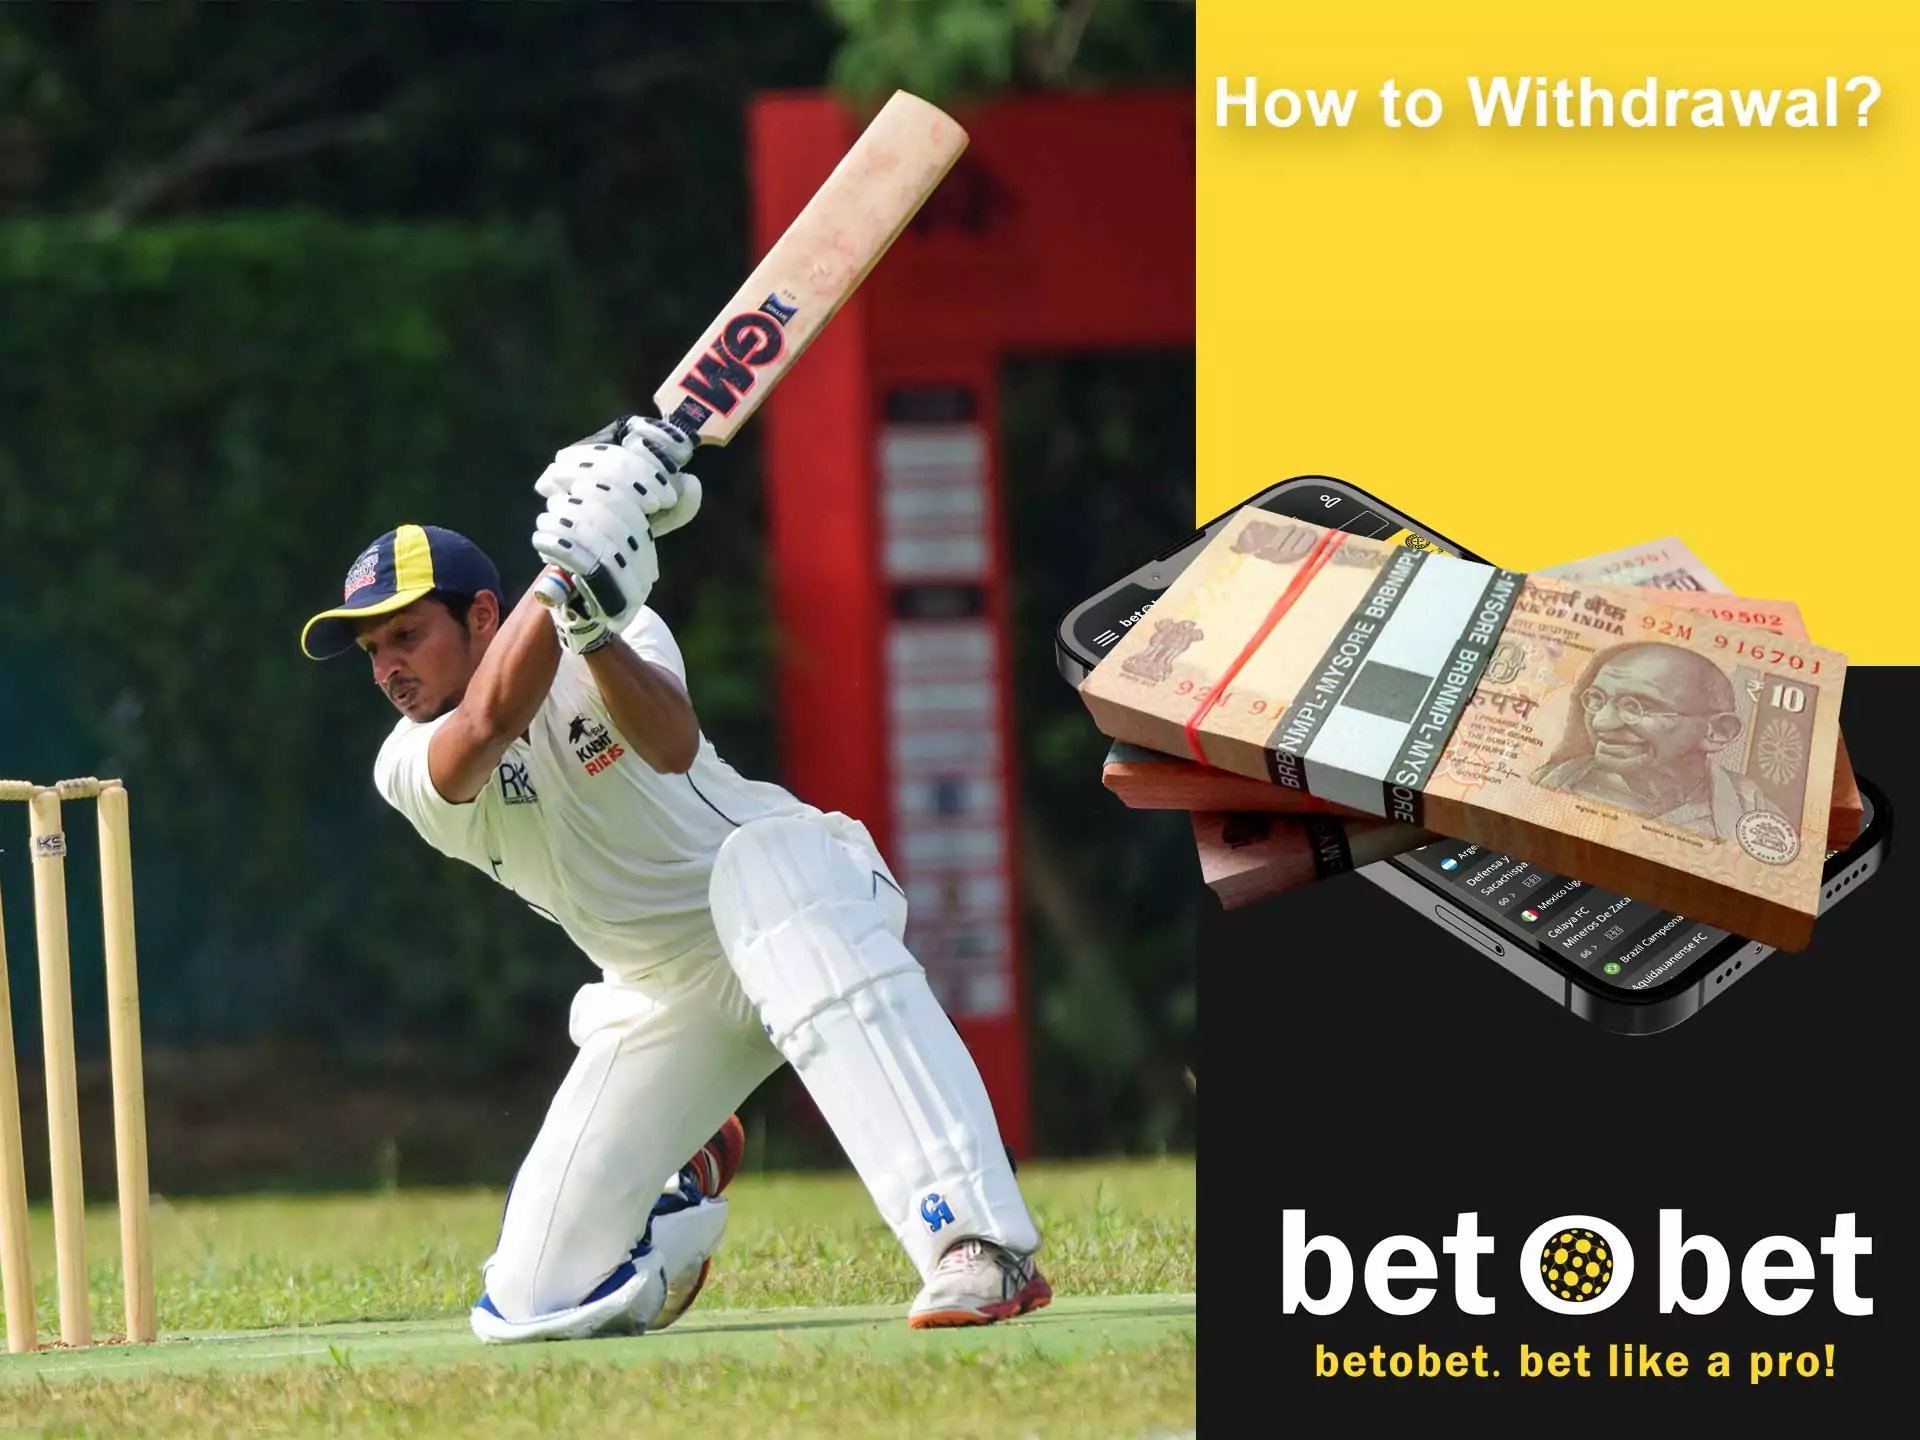 Betobet supports popular withdrawal methods in India.